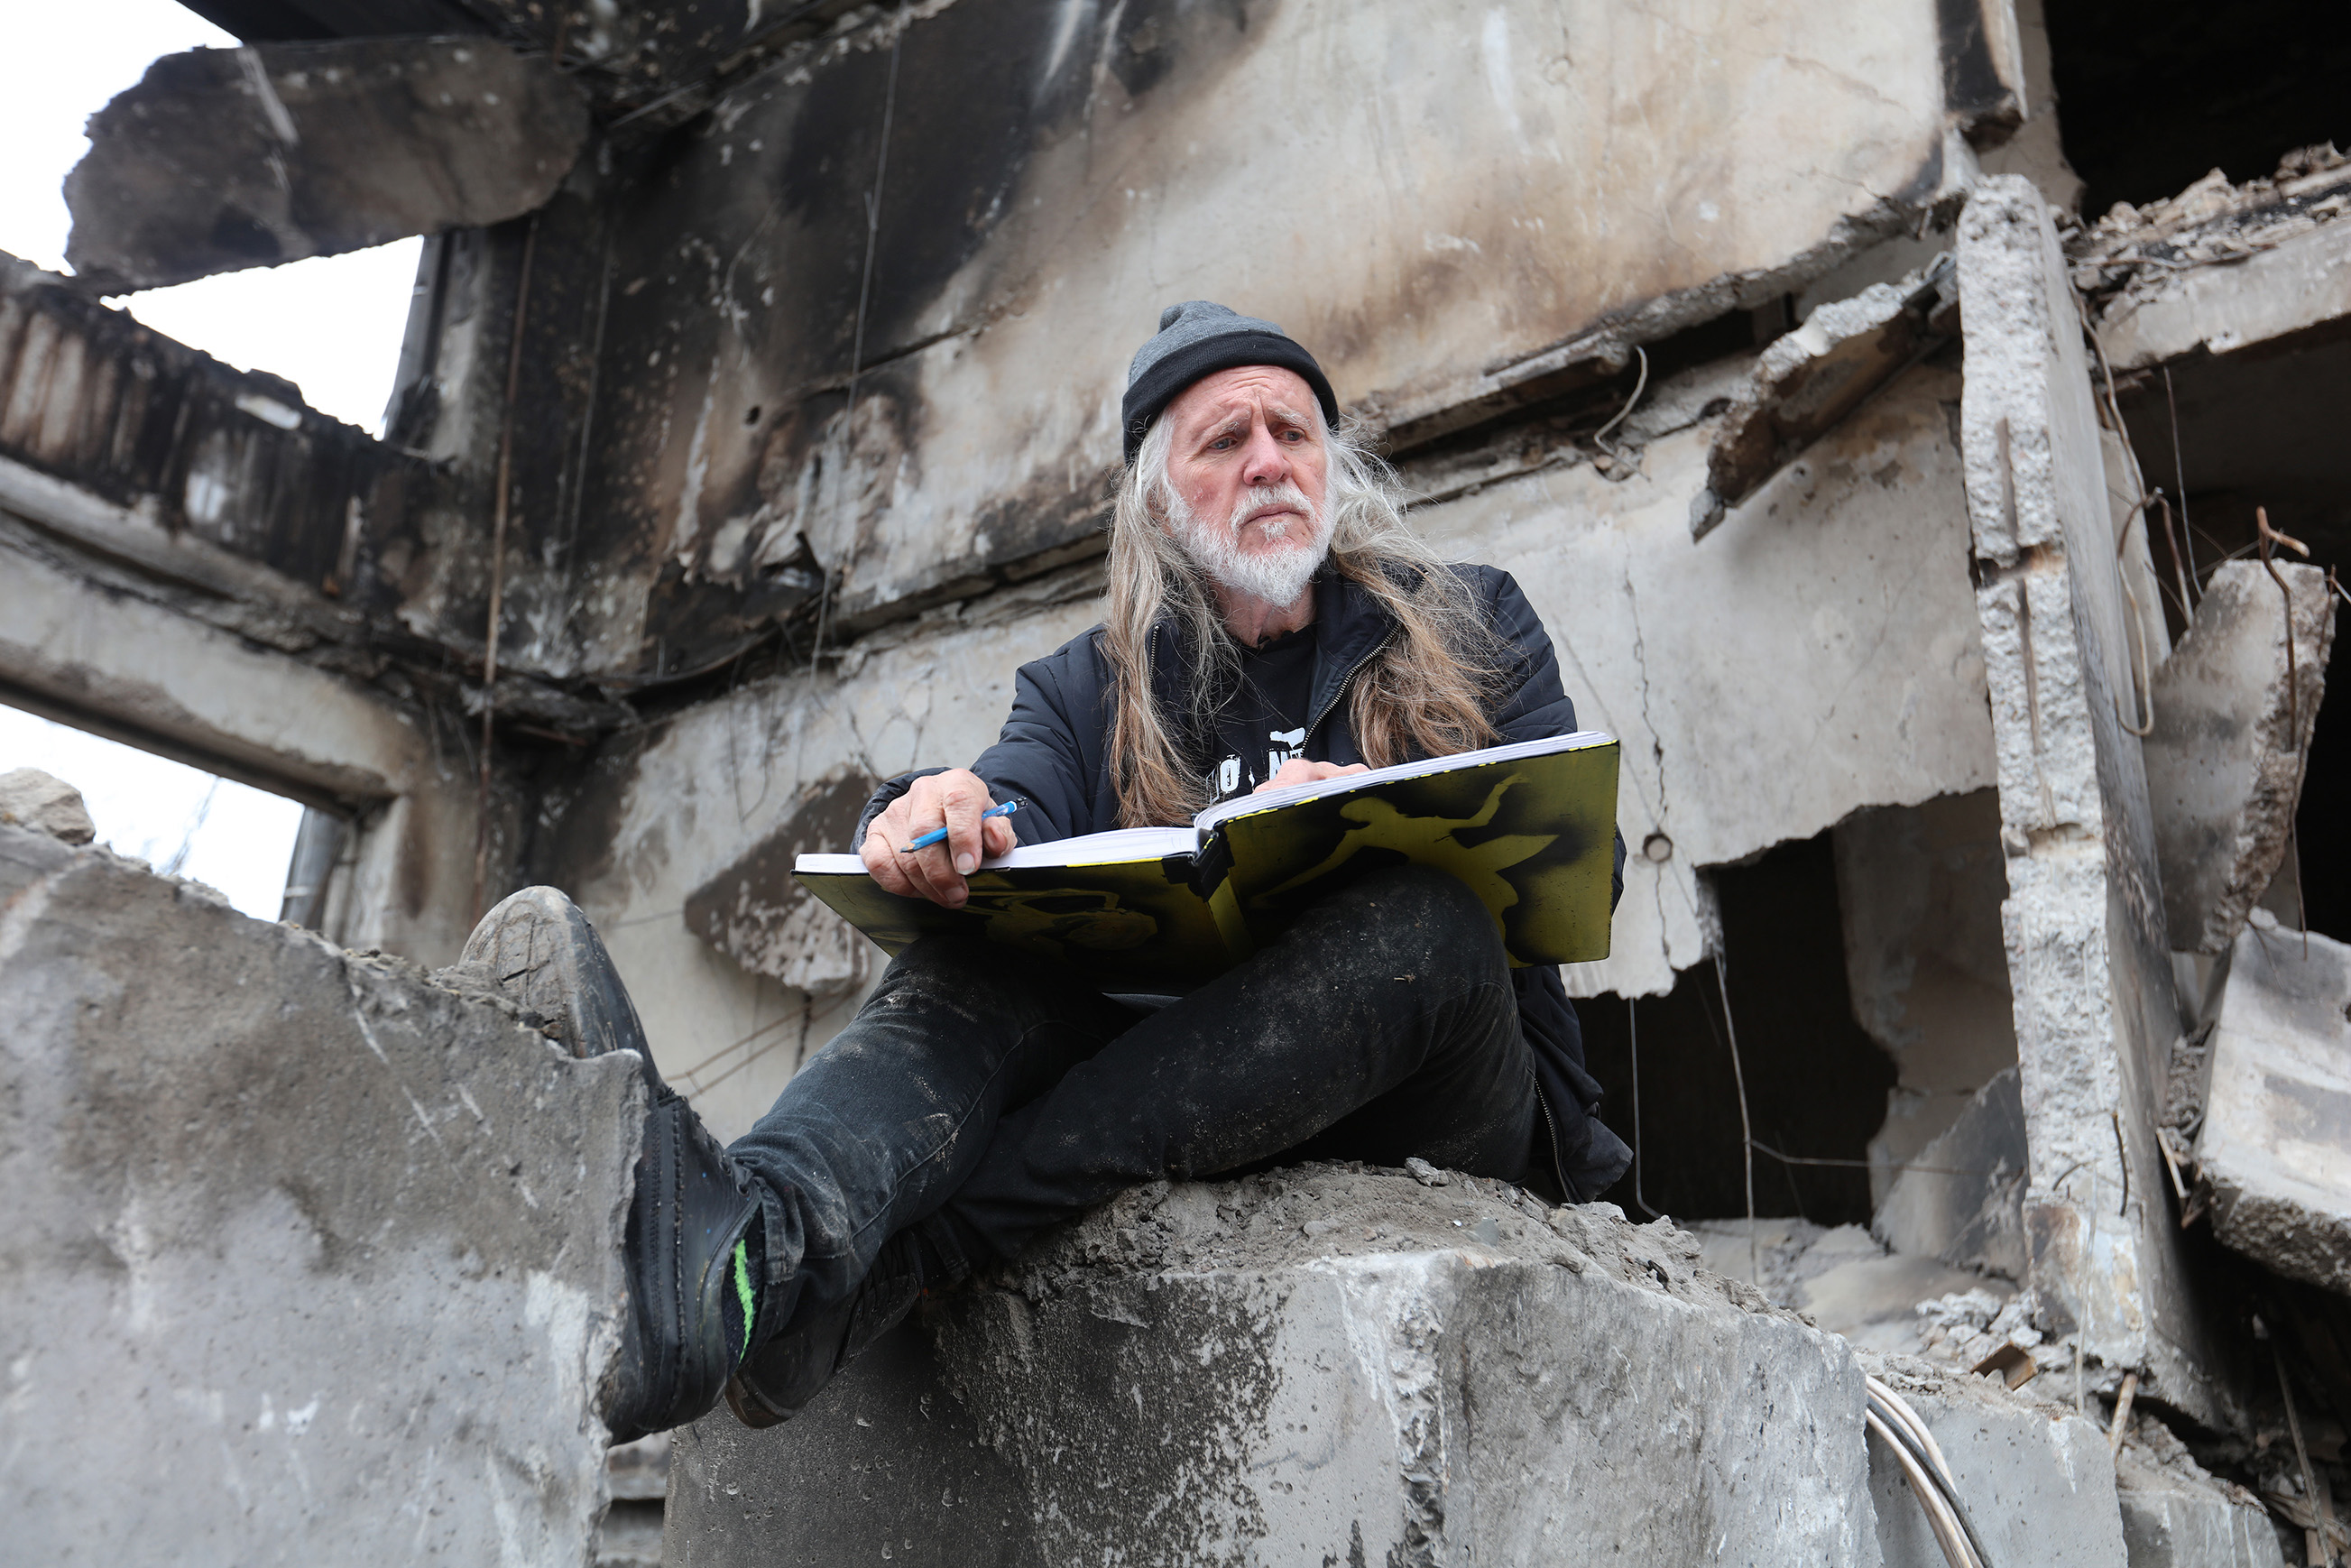 A photograph of artist George Gittoes sitting amongst the rubble of a bombed out building with a sketchpad open on his lap.